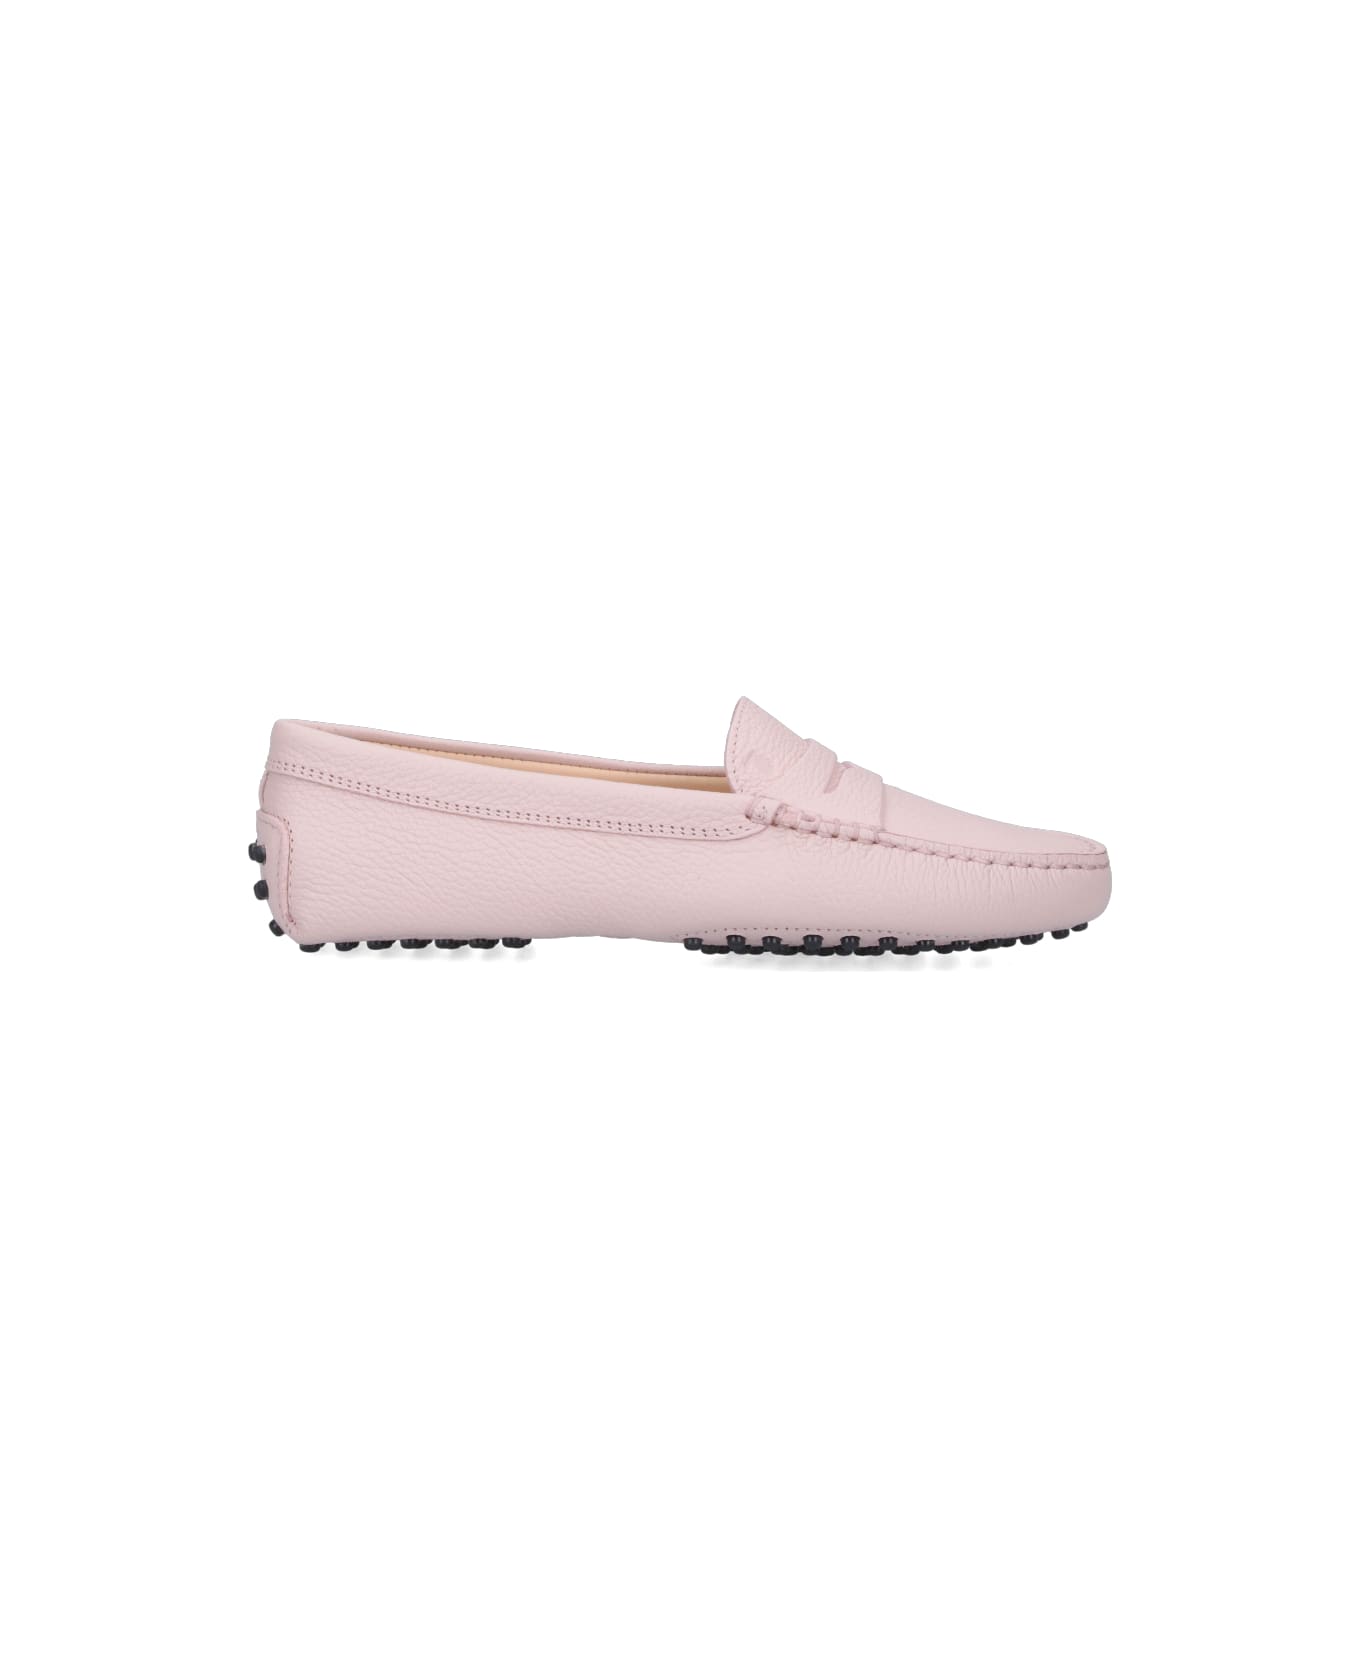 Tod's Loafers - Pink フラットシューズ